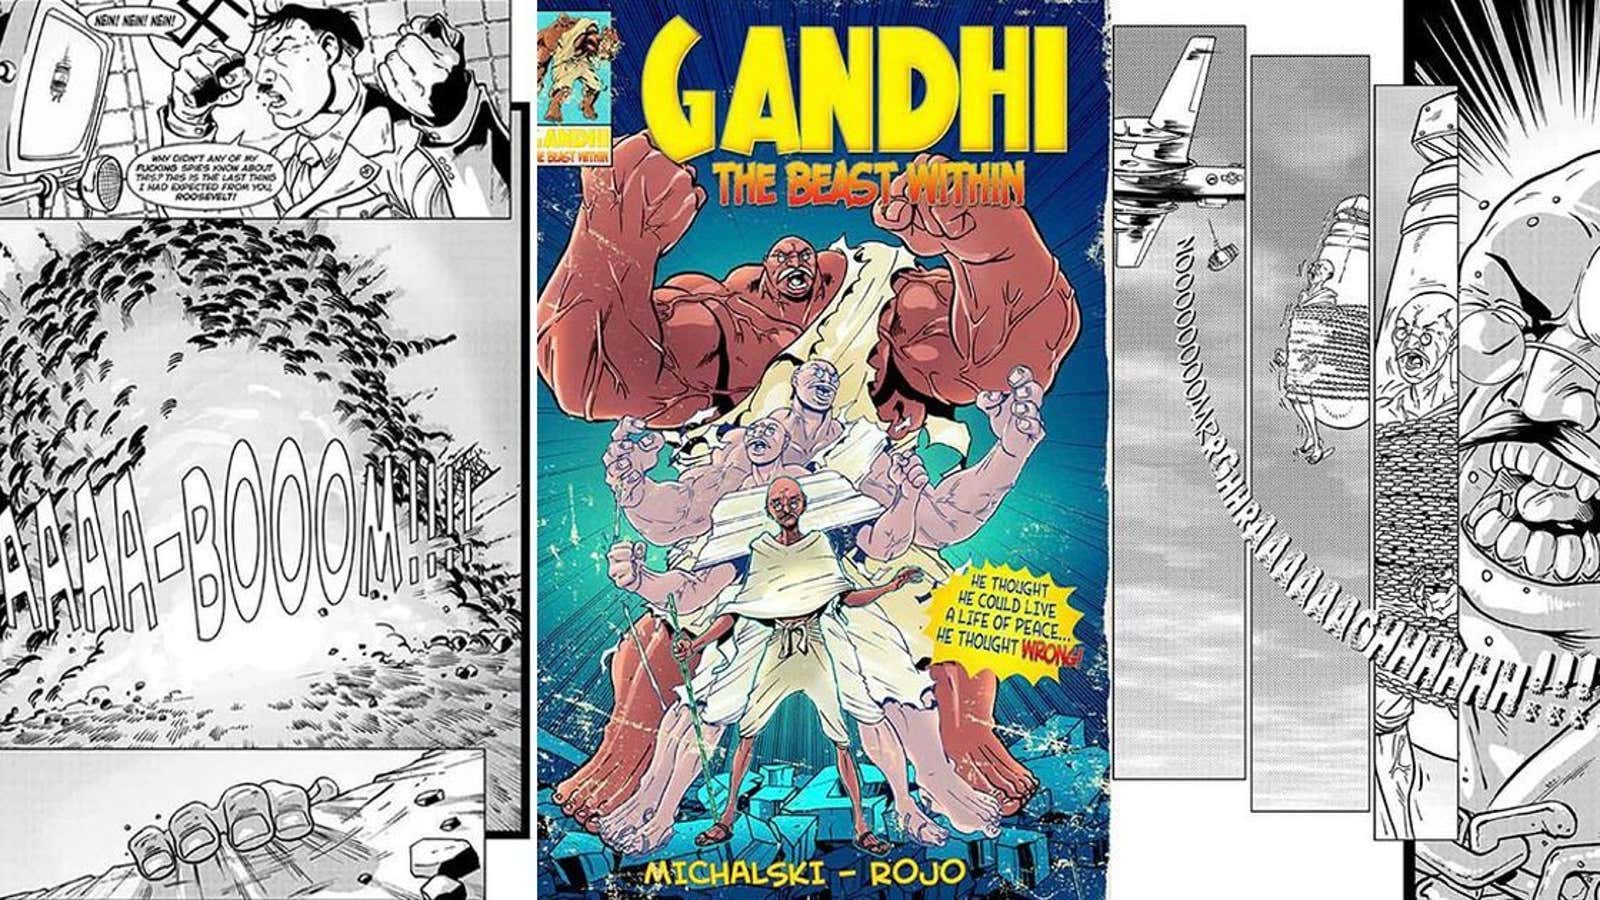 Gandhi – The Beast Within | Written by Jason Michalski and illustrated by Antonio Rojo.